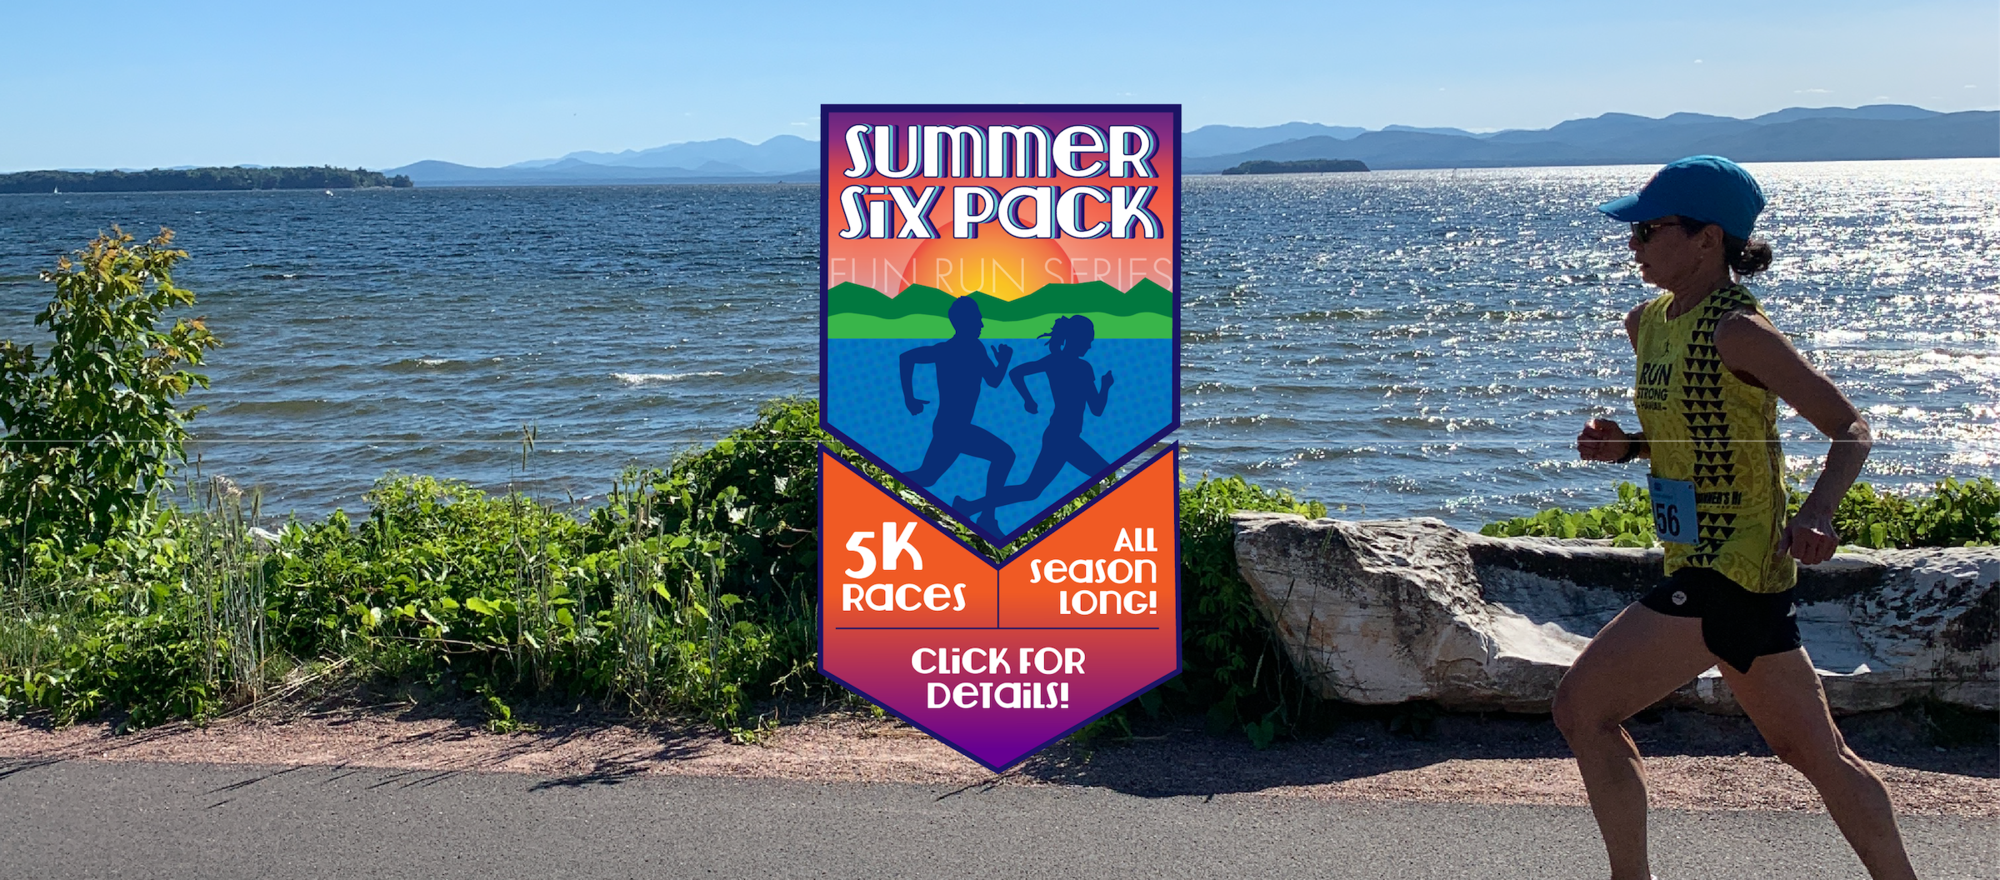 Summer Six Pack - Click to Register!